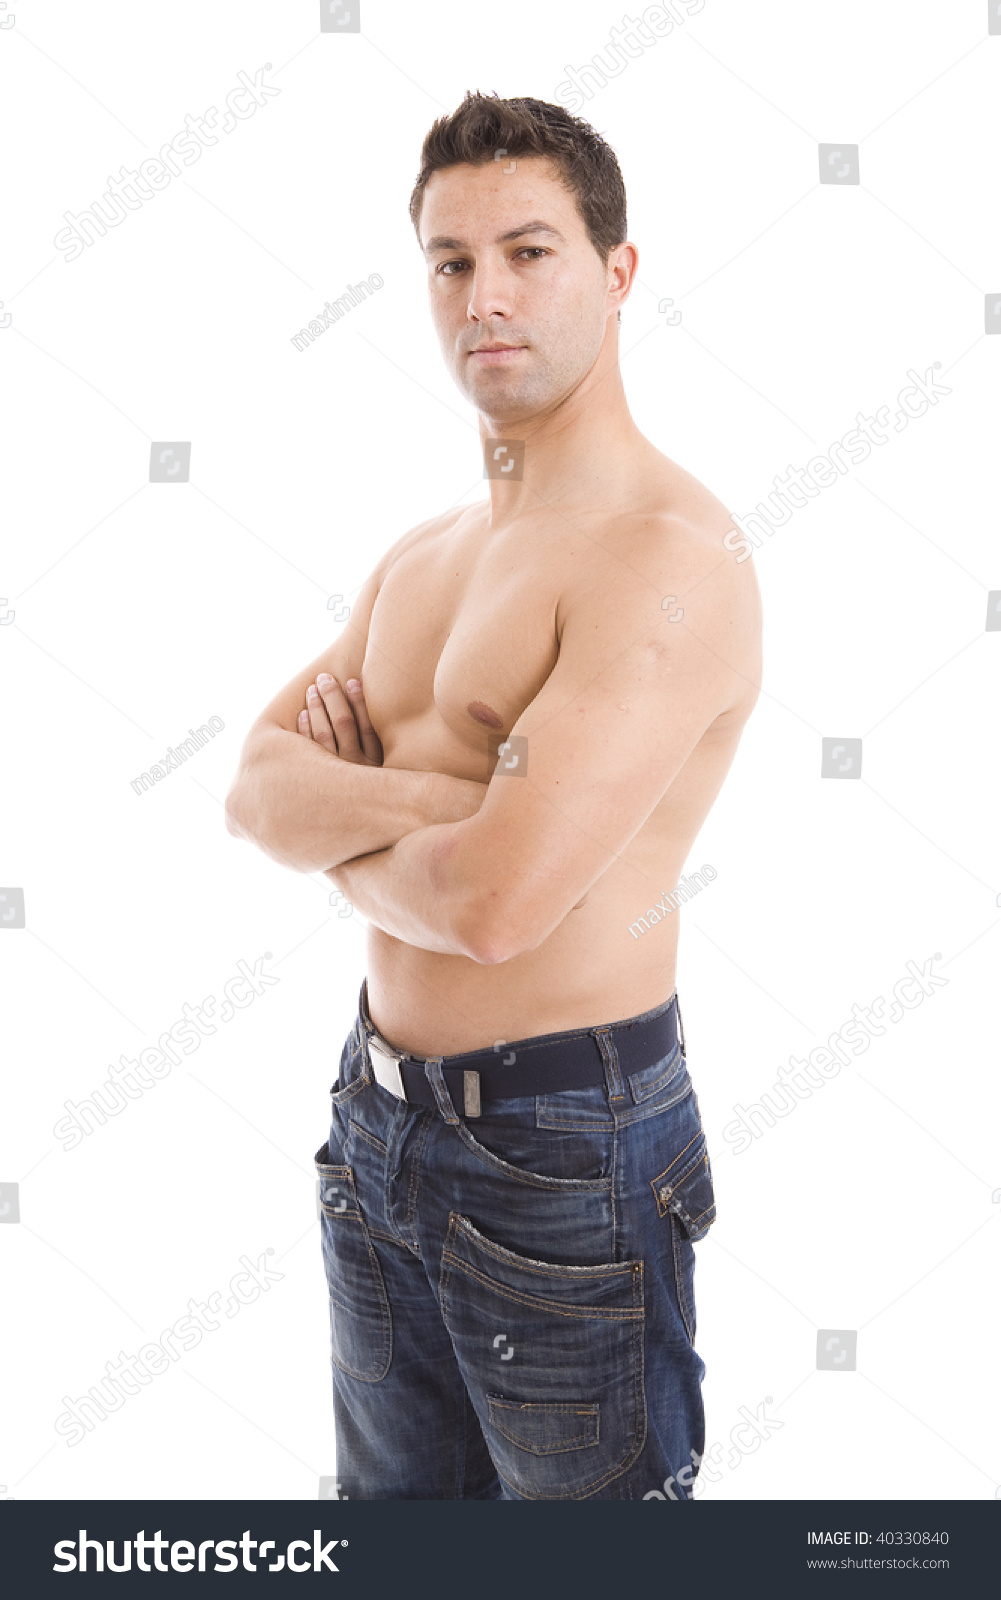 Handsome Naked Muscular Male Body Arms Shutterstock